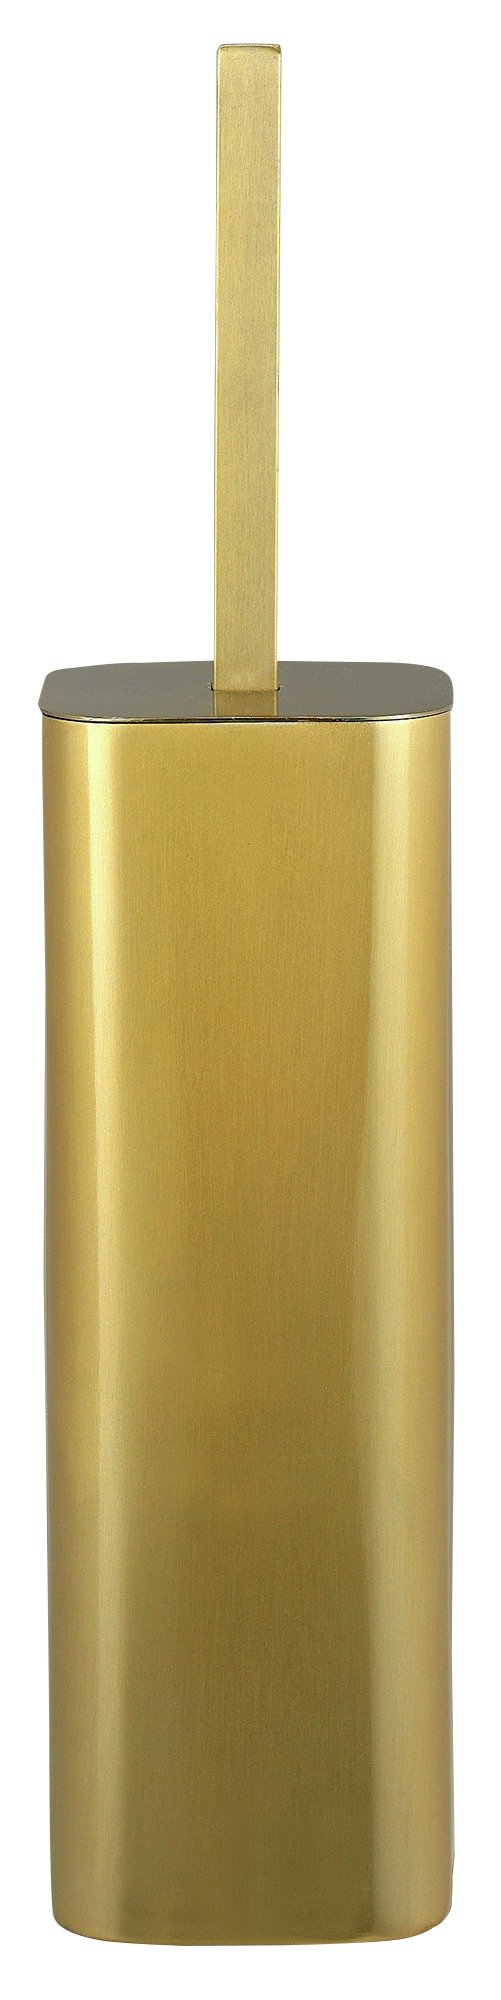 Collection Square Toilet Brush Holder - Gold